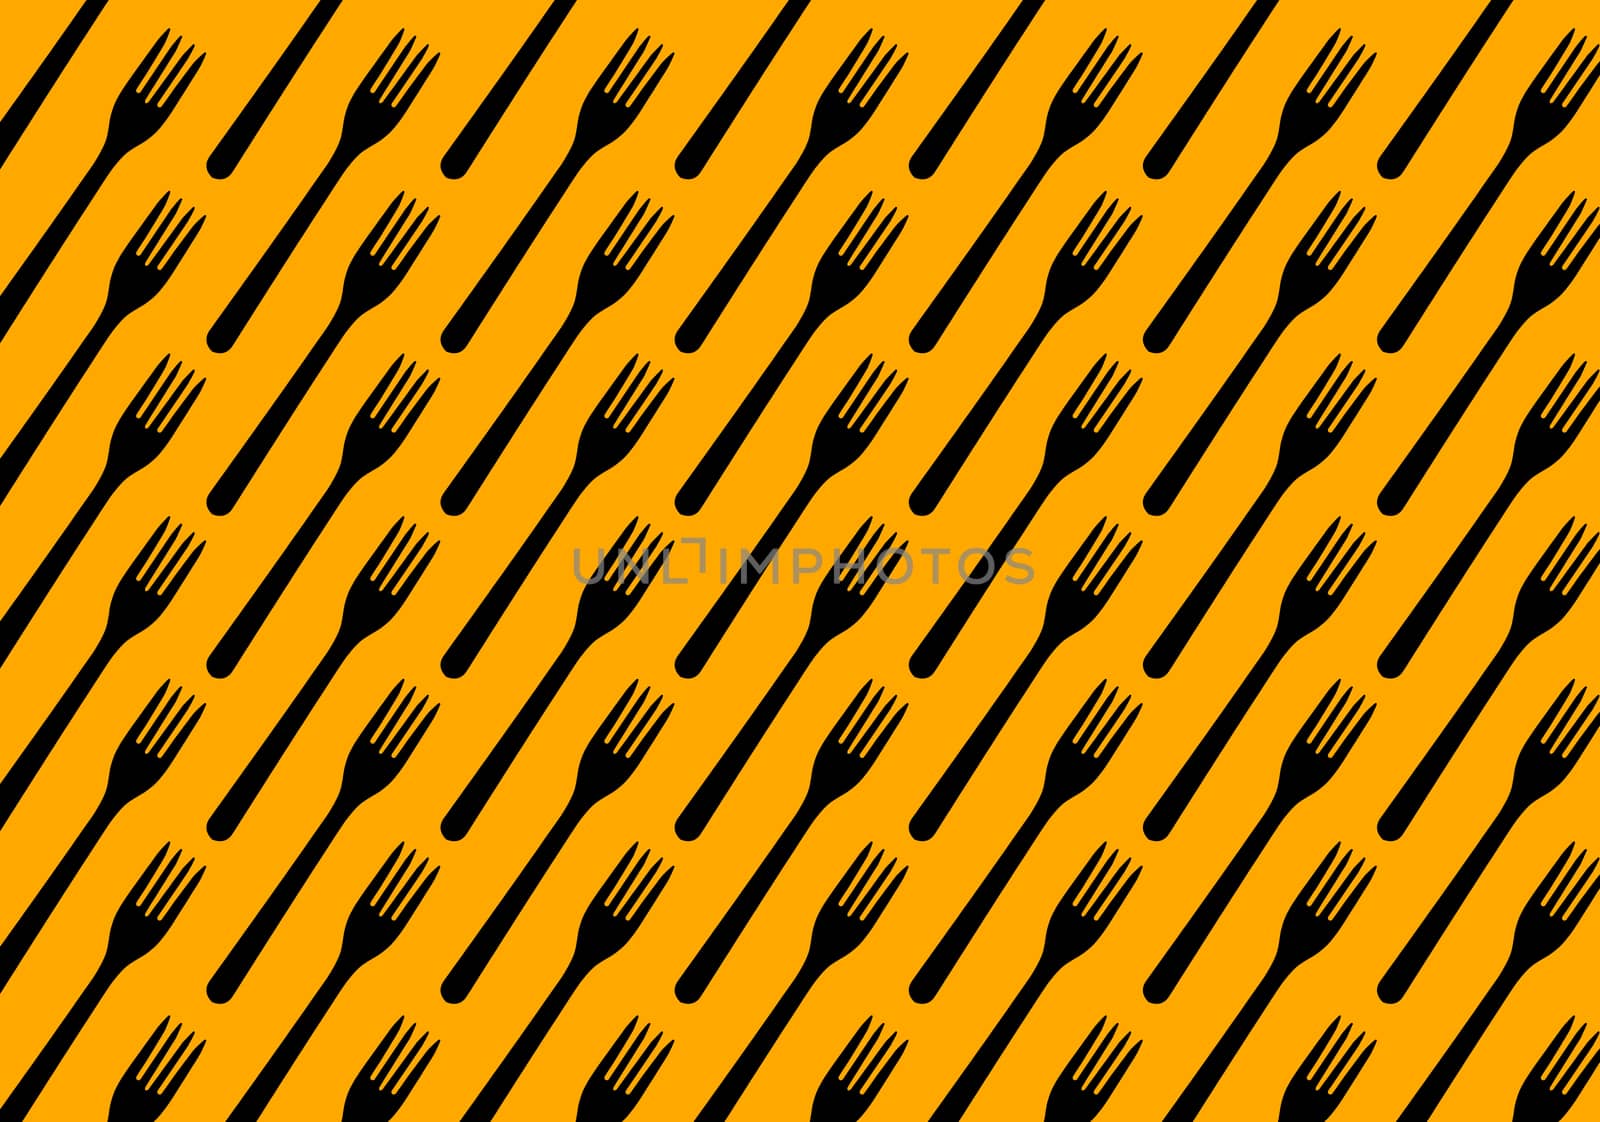 Many black plastic forks on yellow background, top view. Disposable table wear concept. Creative top view pattern.